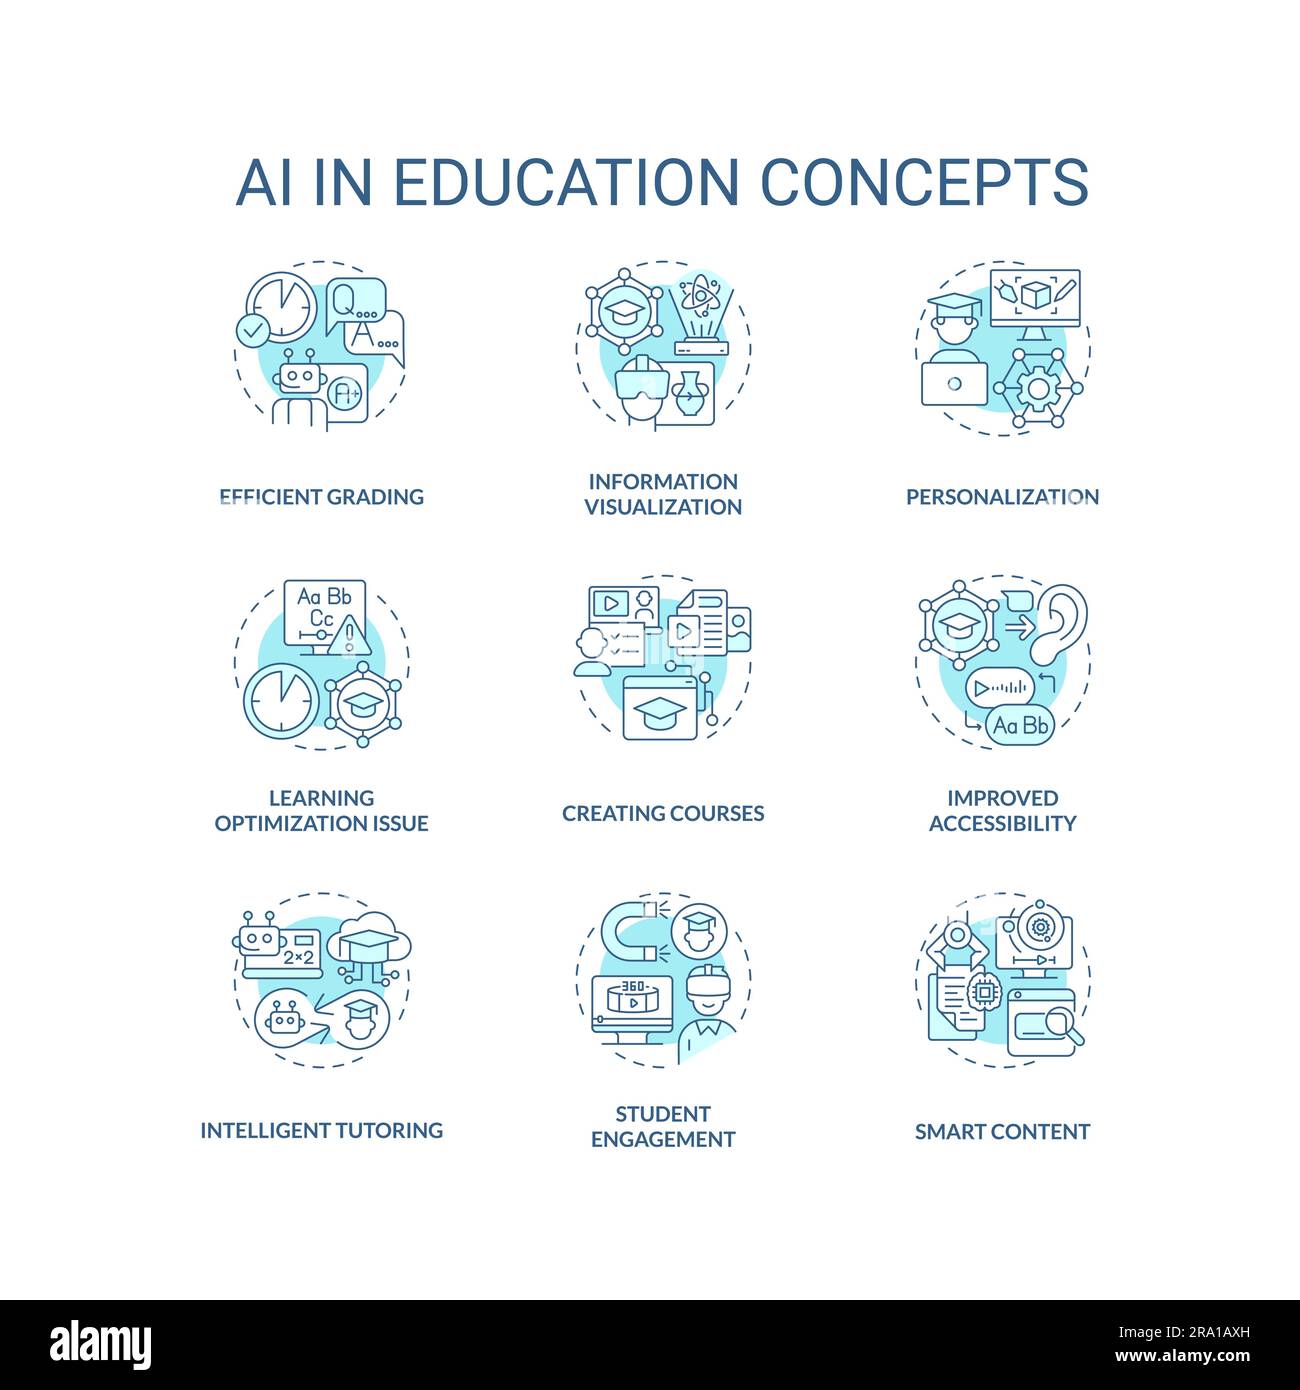 Various AI in education concept editable icons Stock Vector